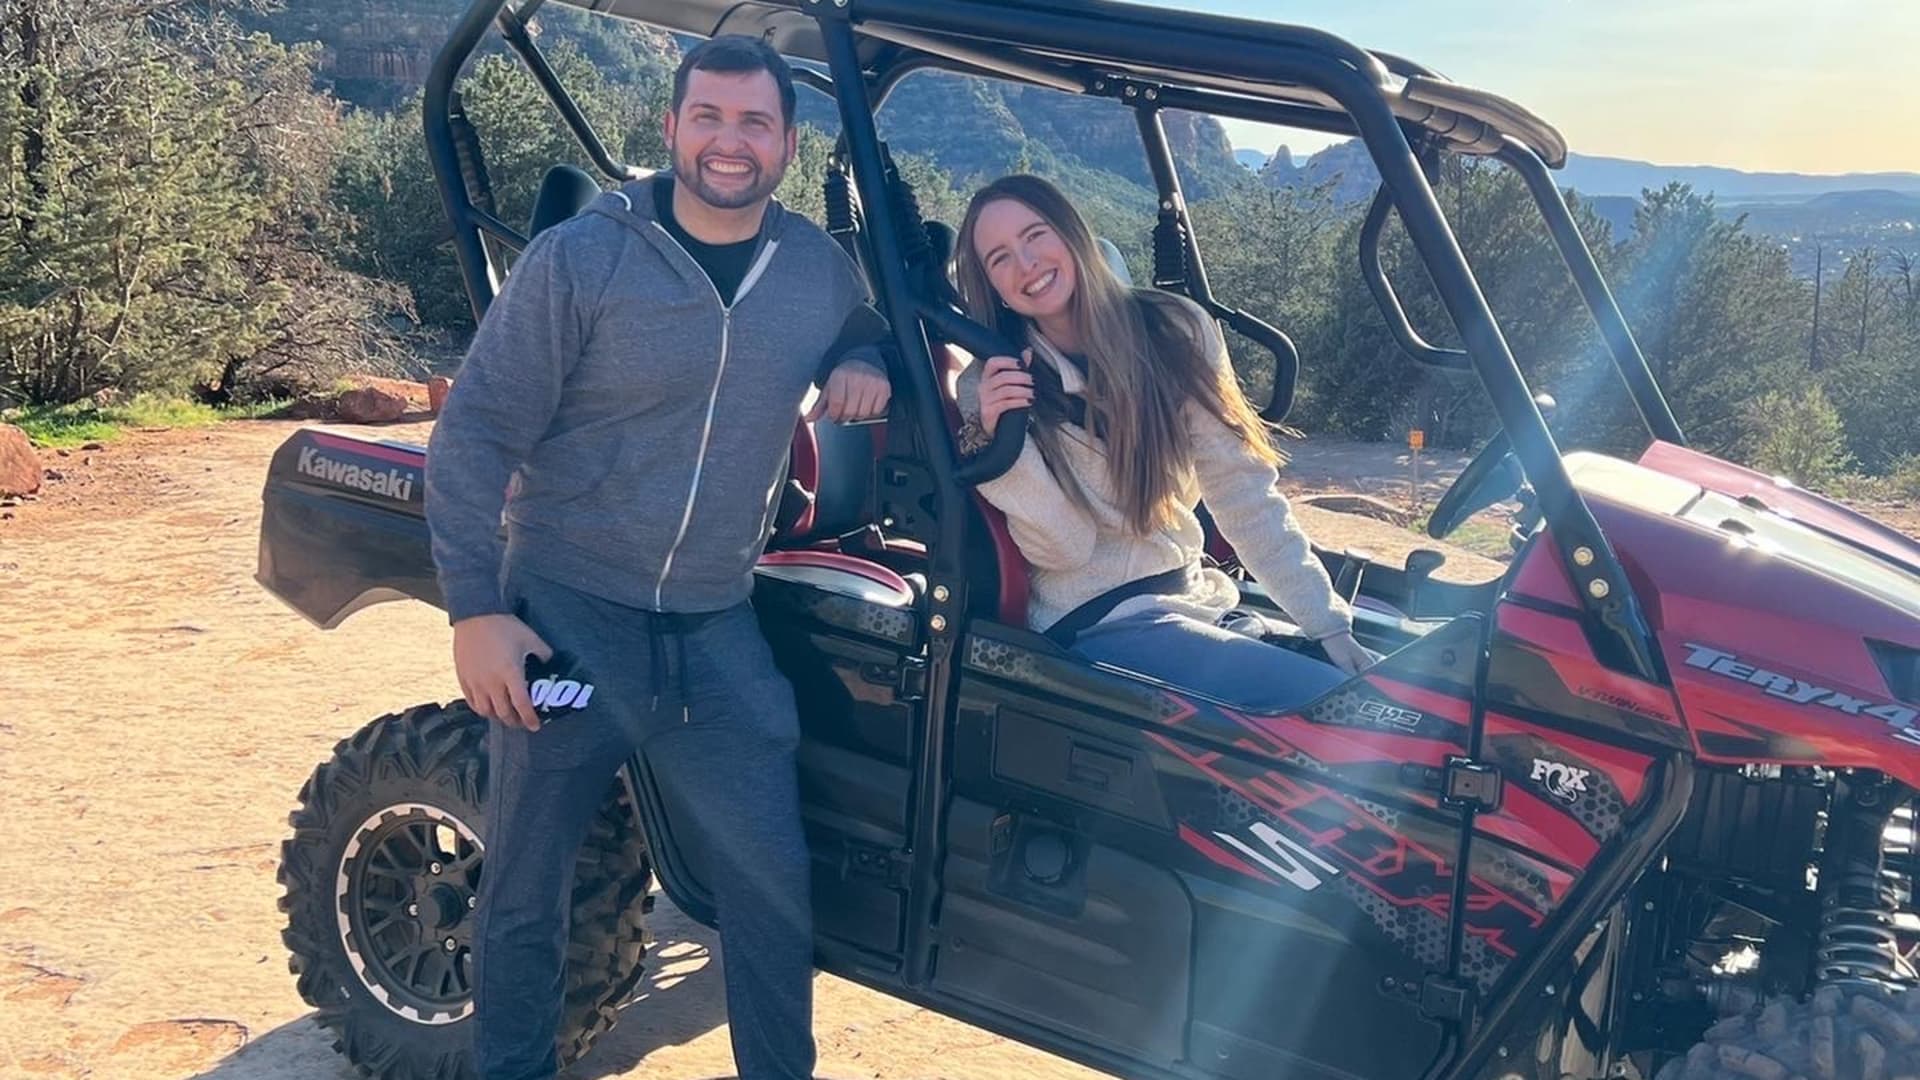 Living in Sedona makes spending time outside easy. Off-roading is a fun way to connect with nature and boost my creativity.